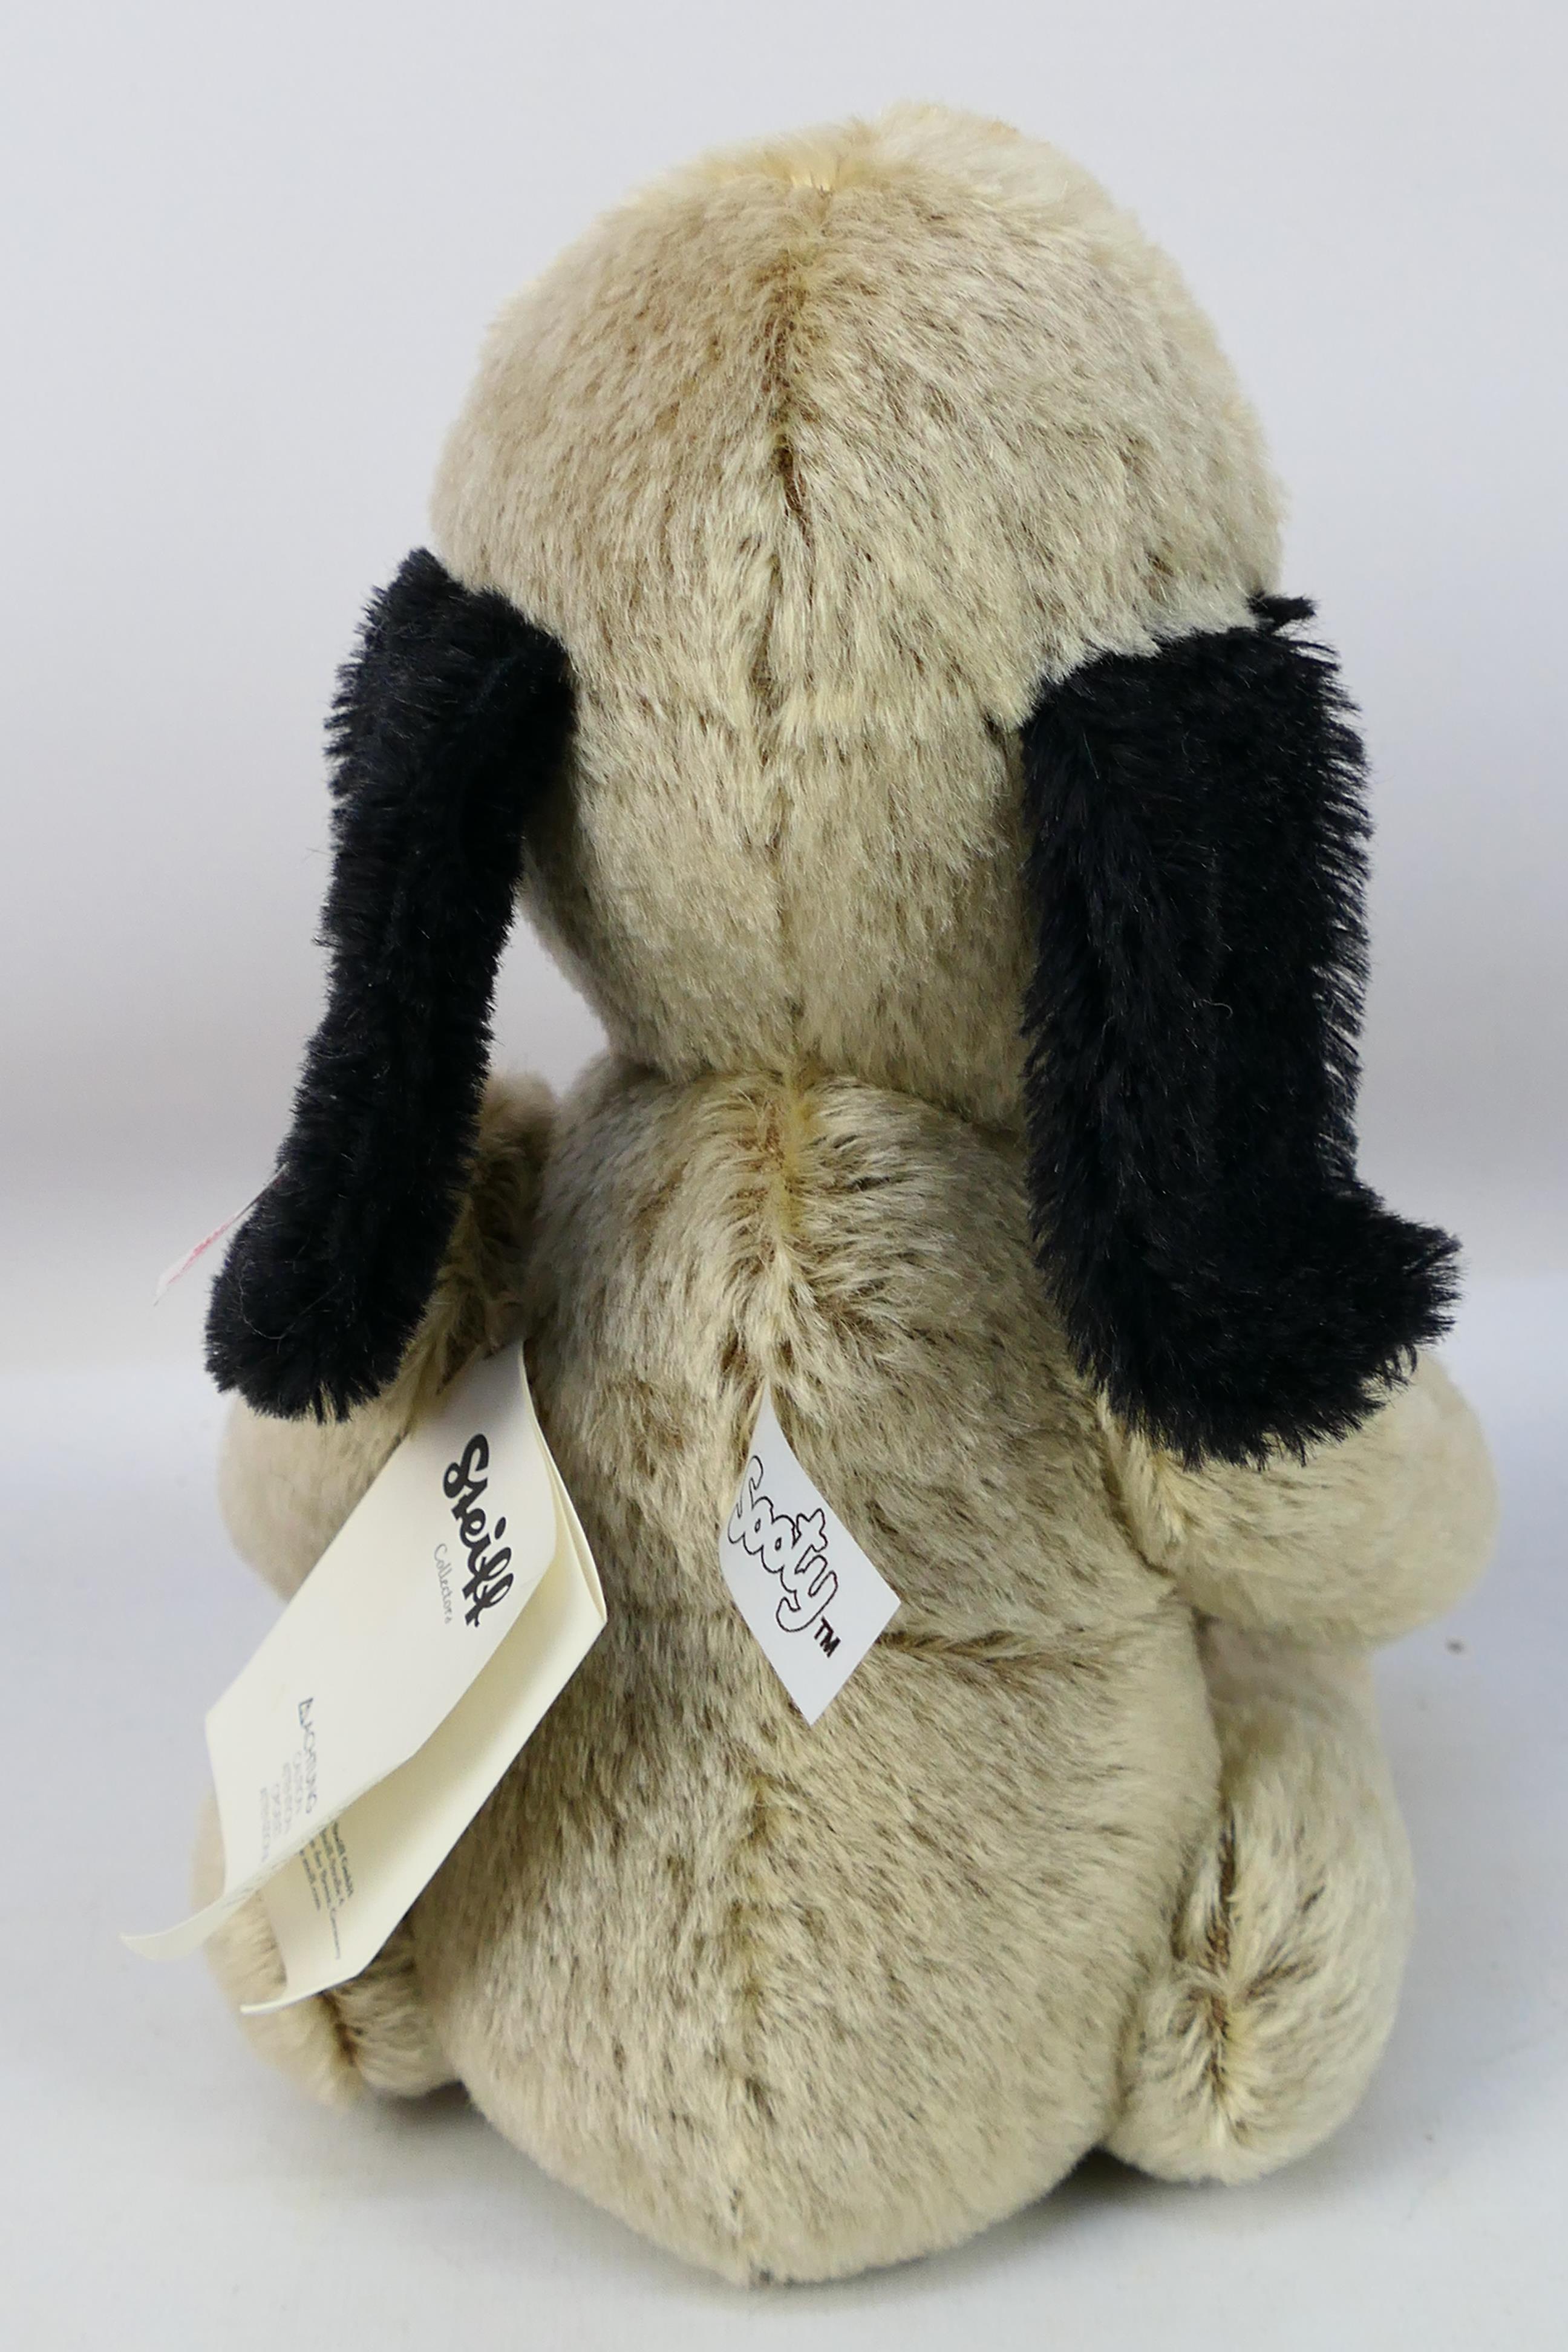 Steiff - Sooty Show - Plush - A Sweep Plush (#664410) from The Sooty Show, - Image 6 of 8